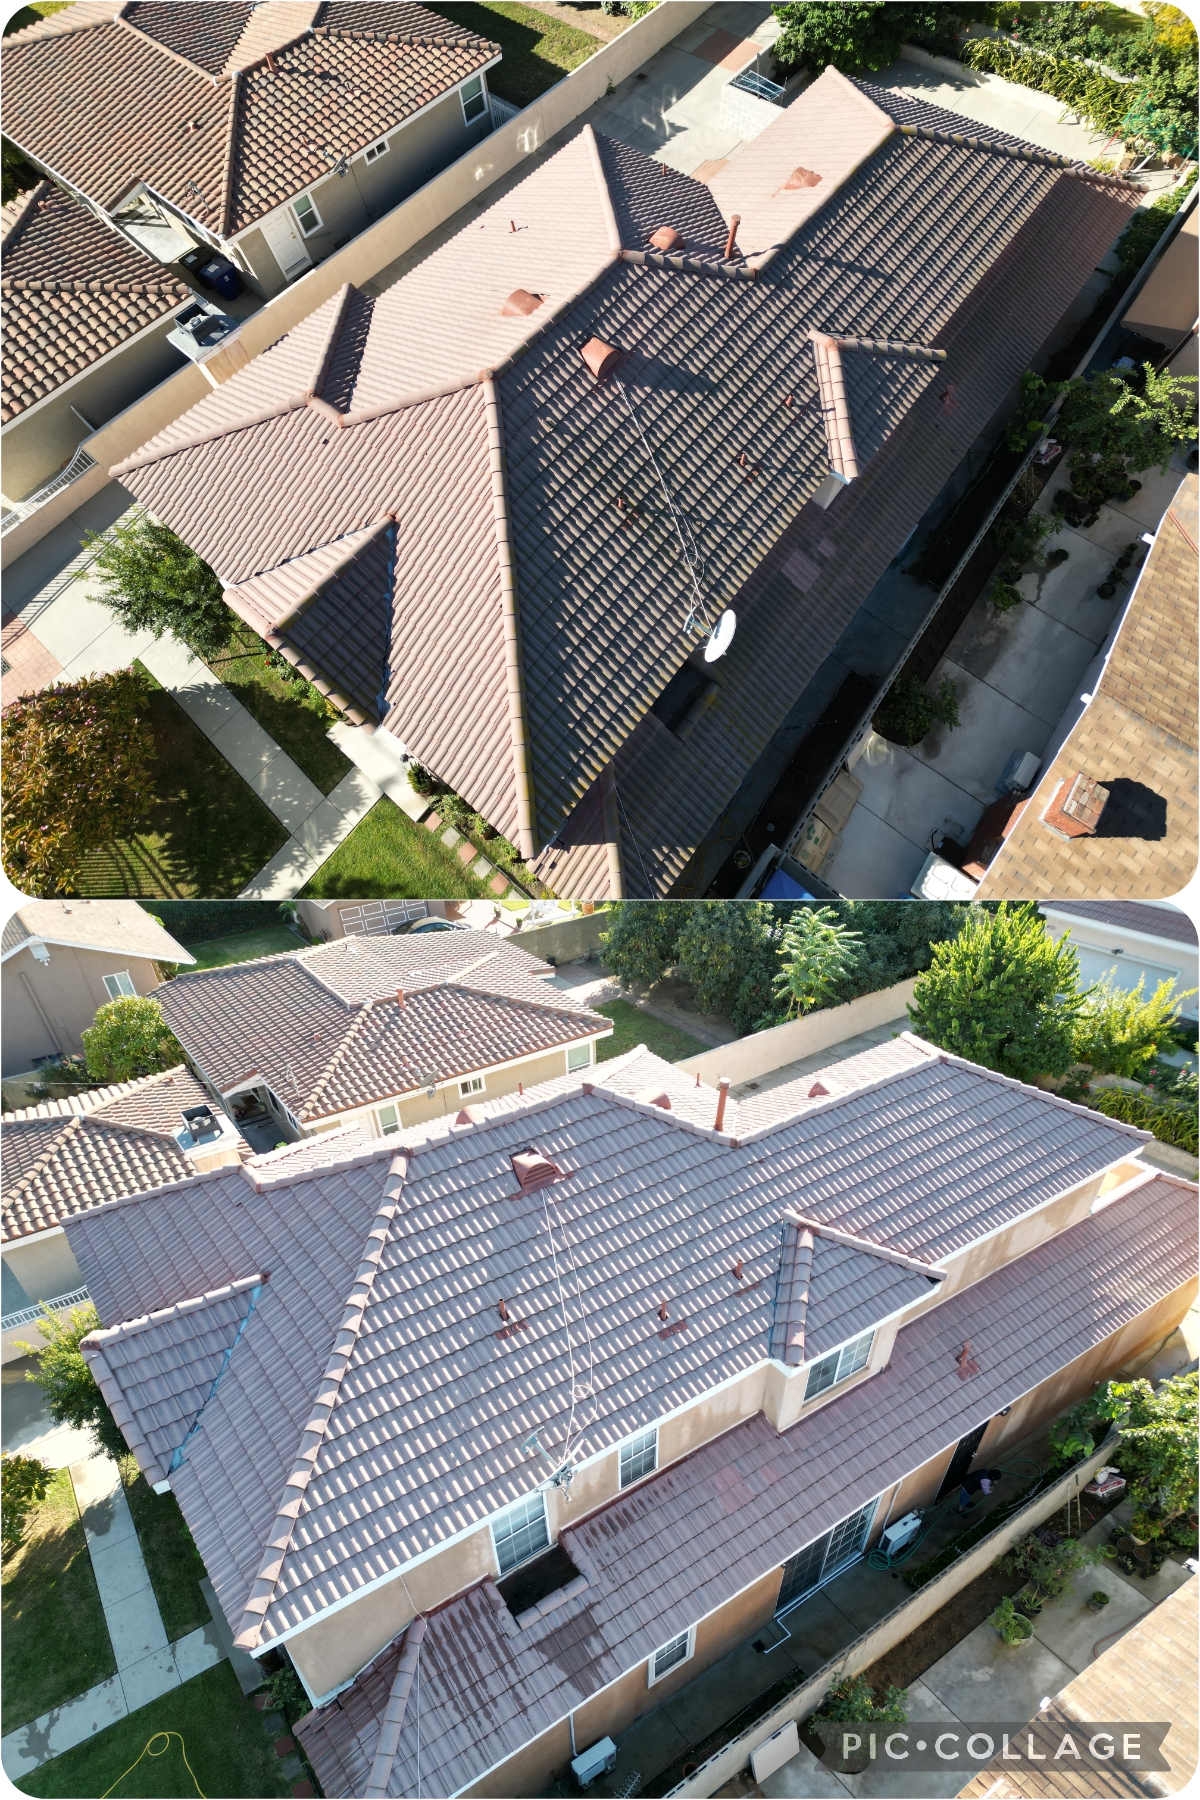 Tile roof cleaning before solar panel installation